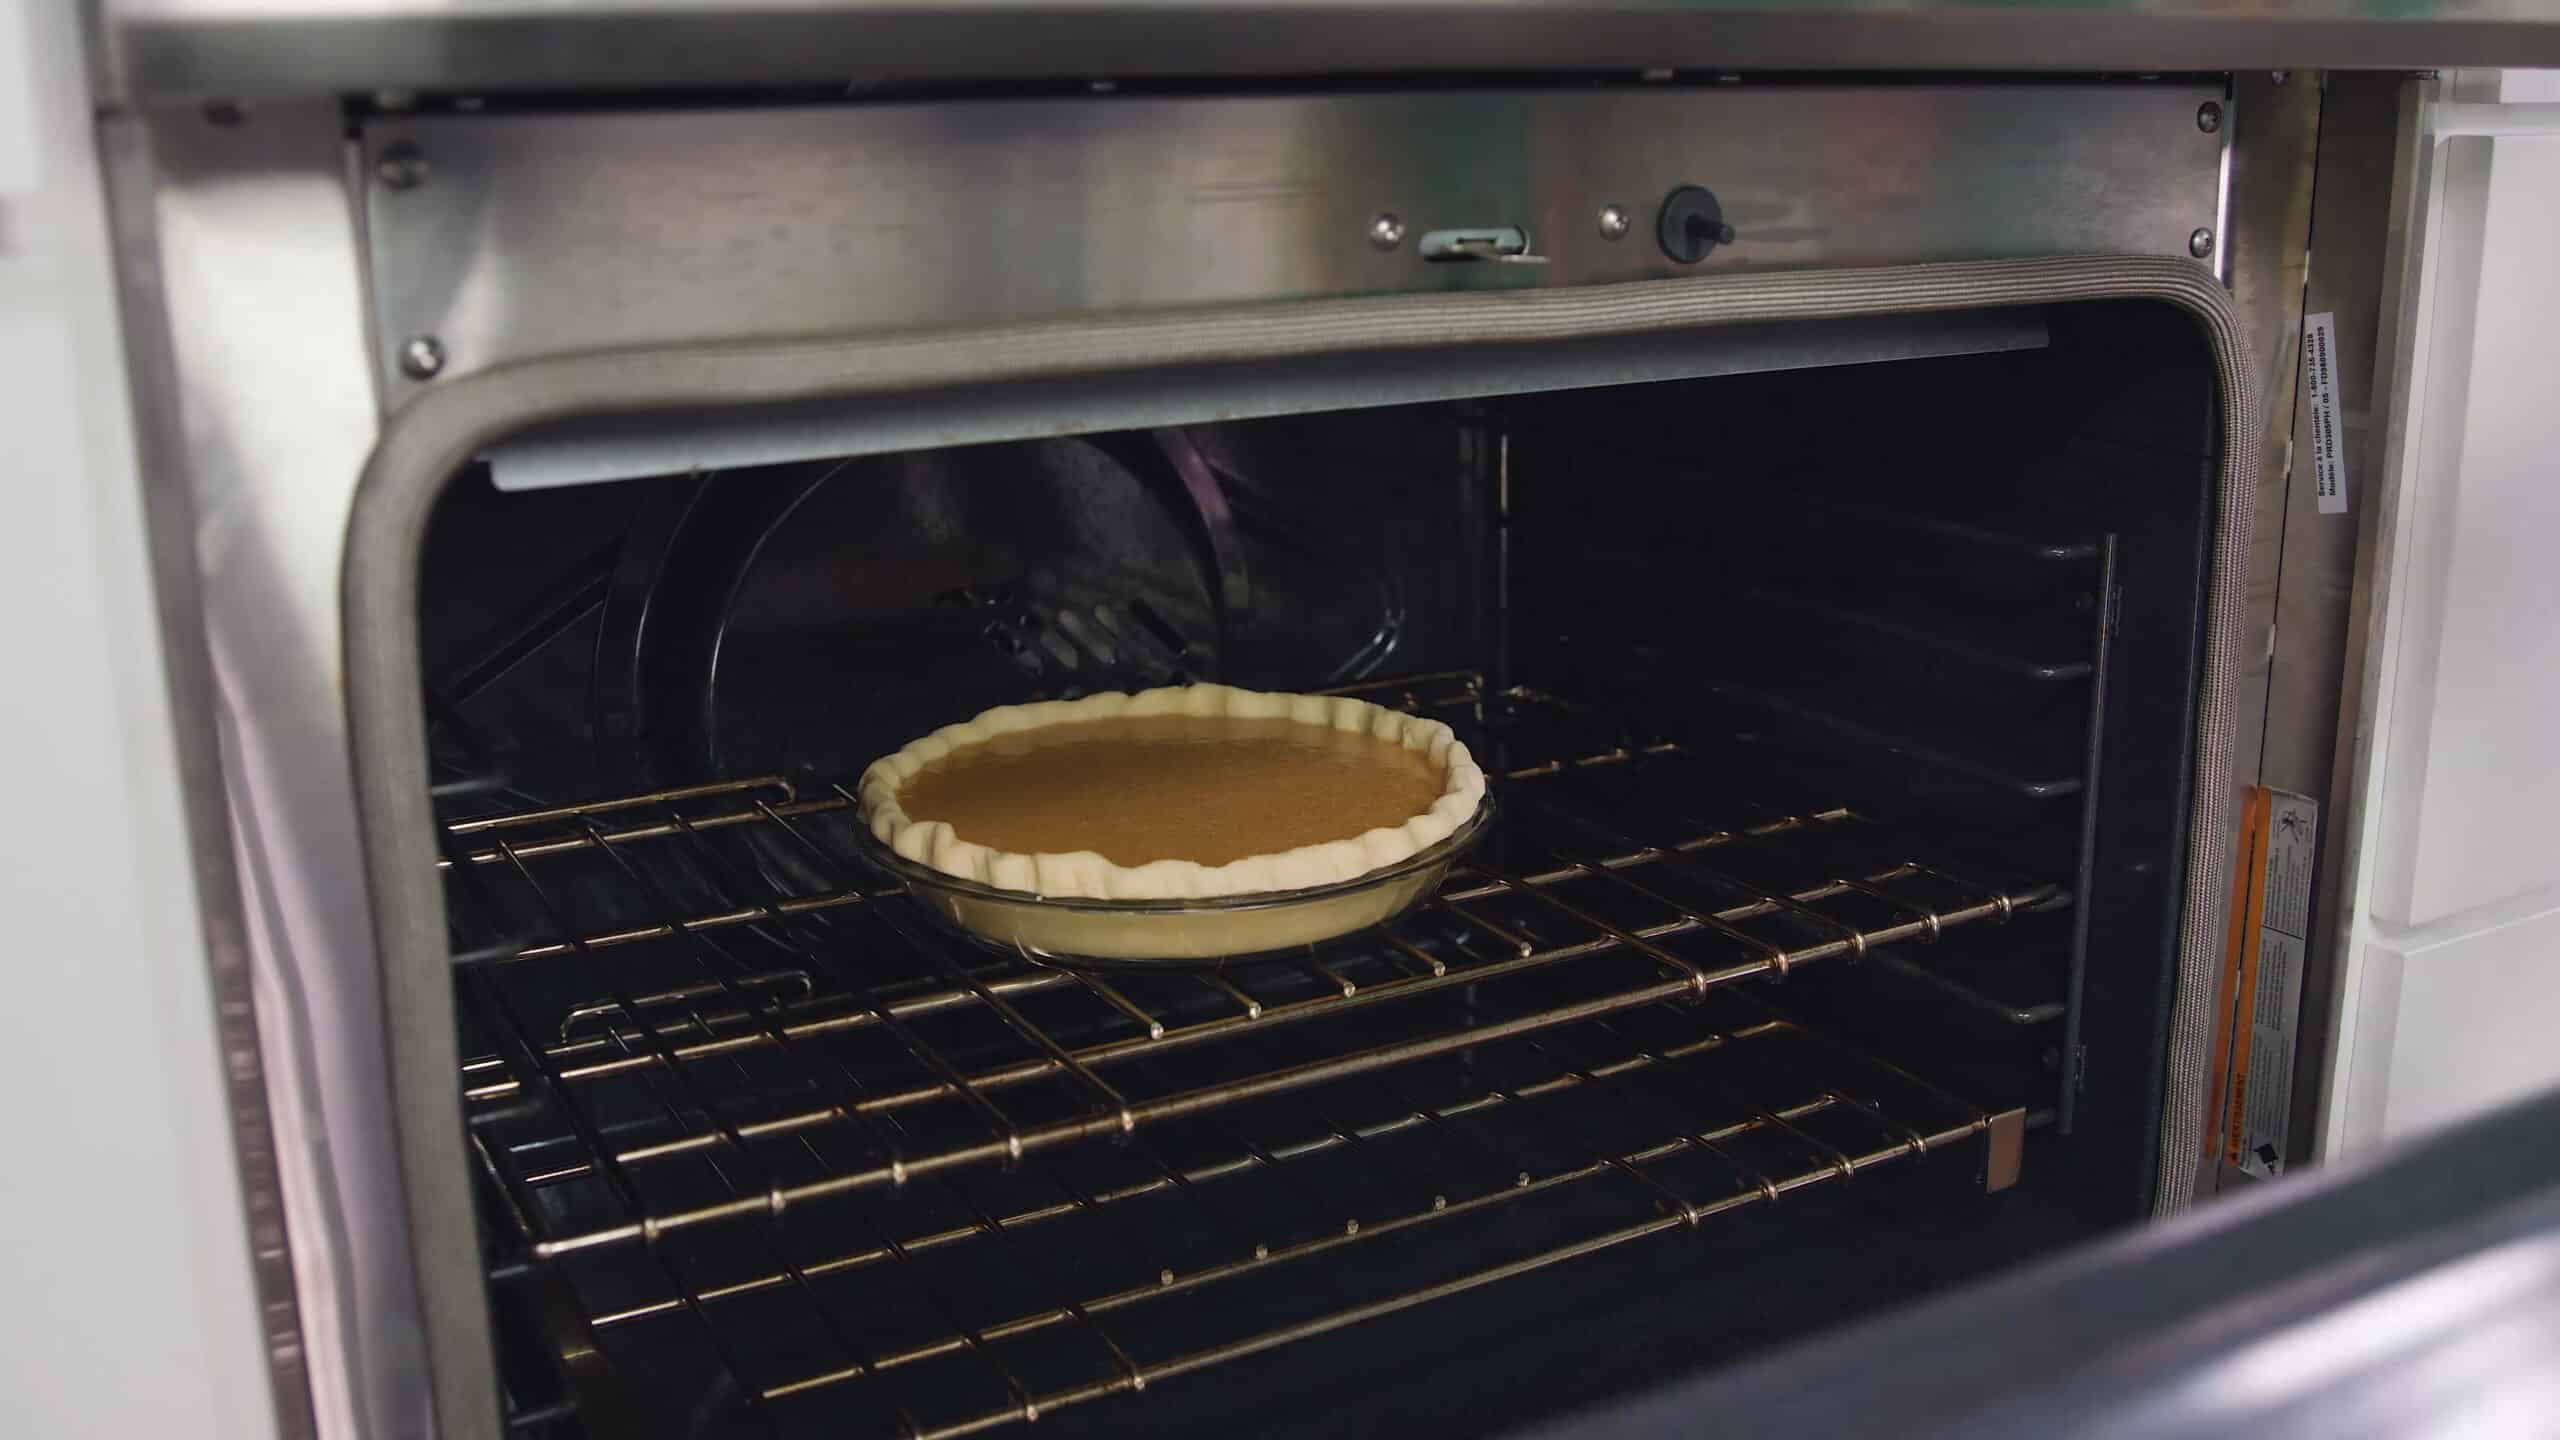 Angled view of open oven with clear glass pie plate filled with uncooked pie crust filled with sweet potato pie filling on a rack in the middle of the oven.